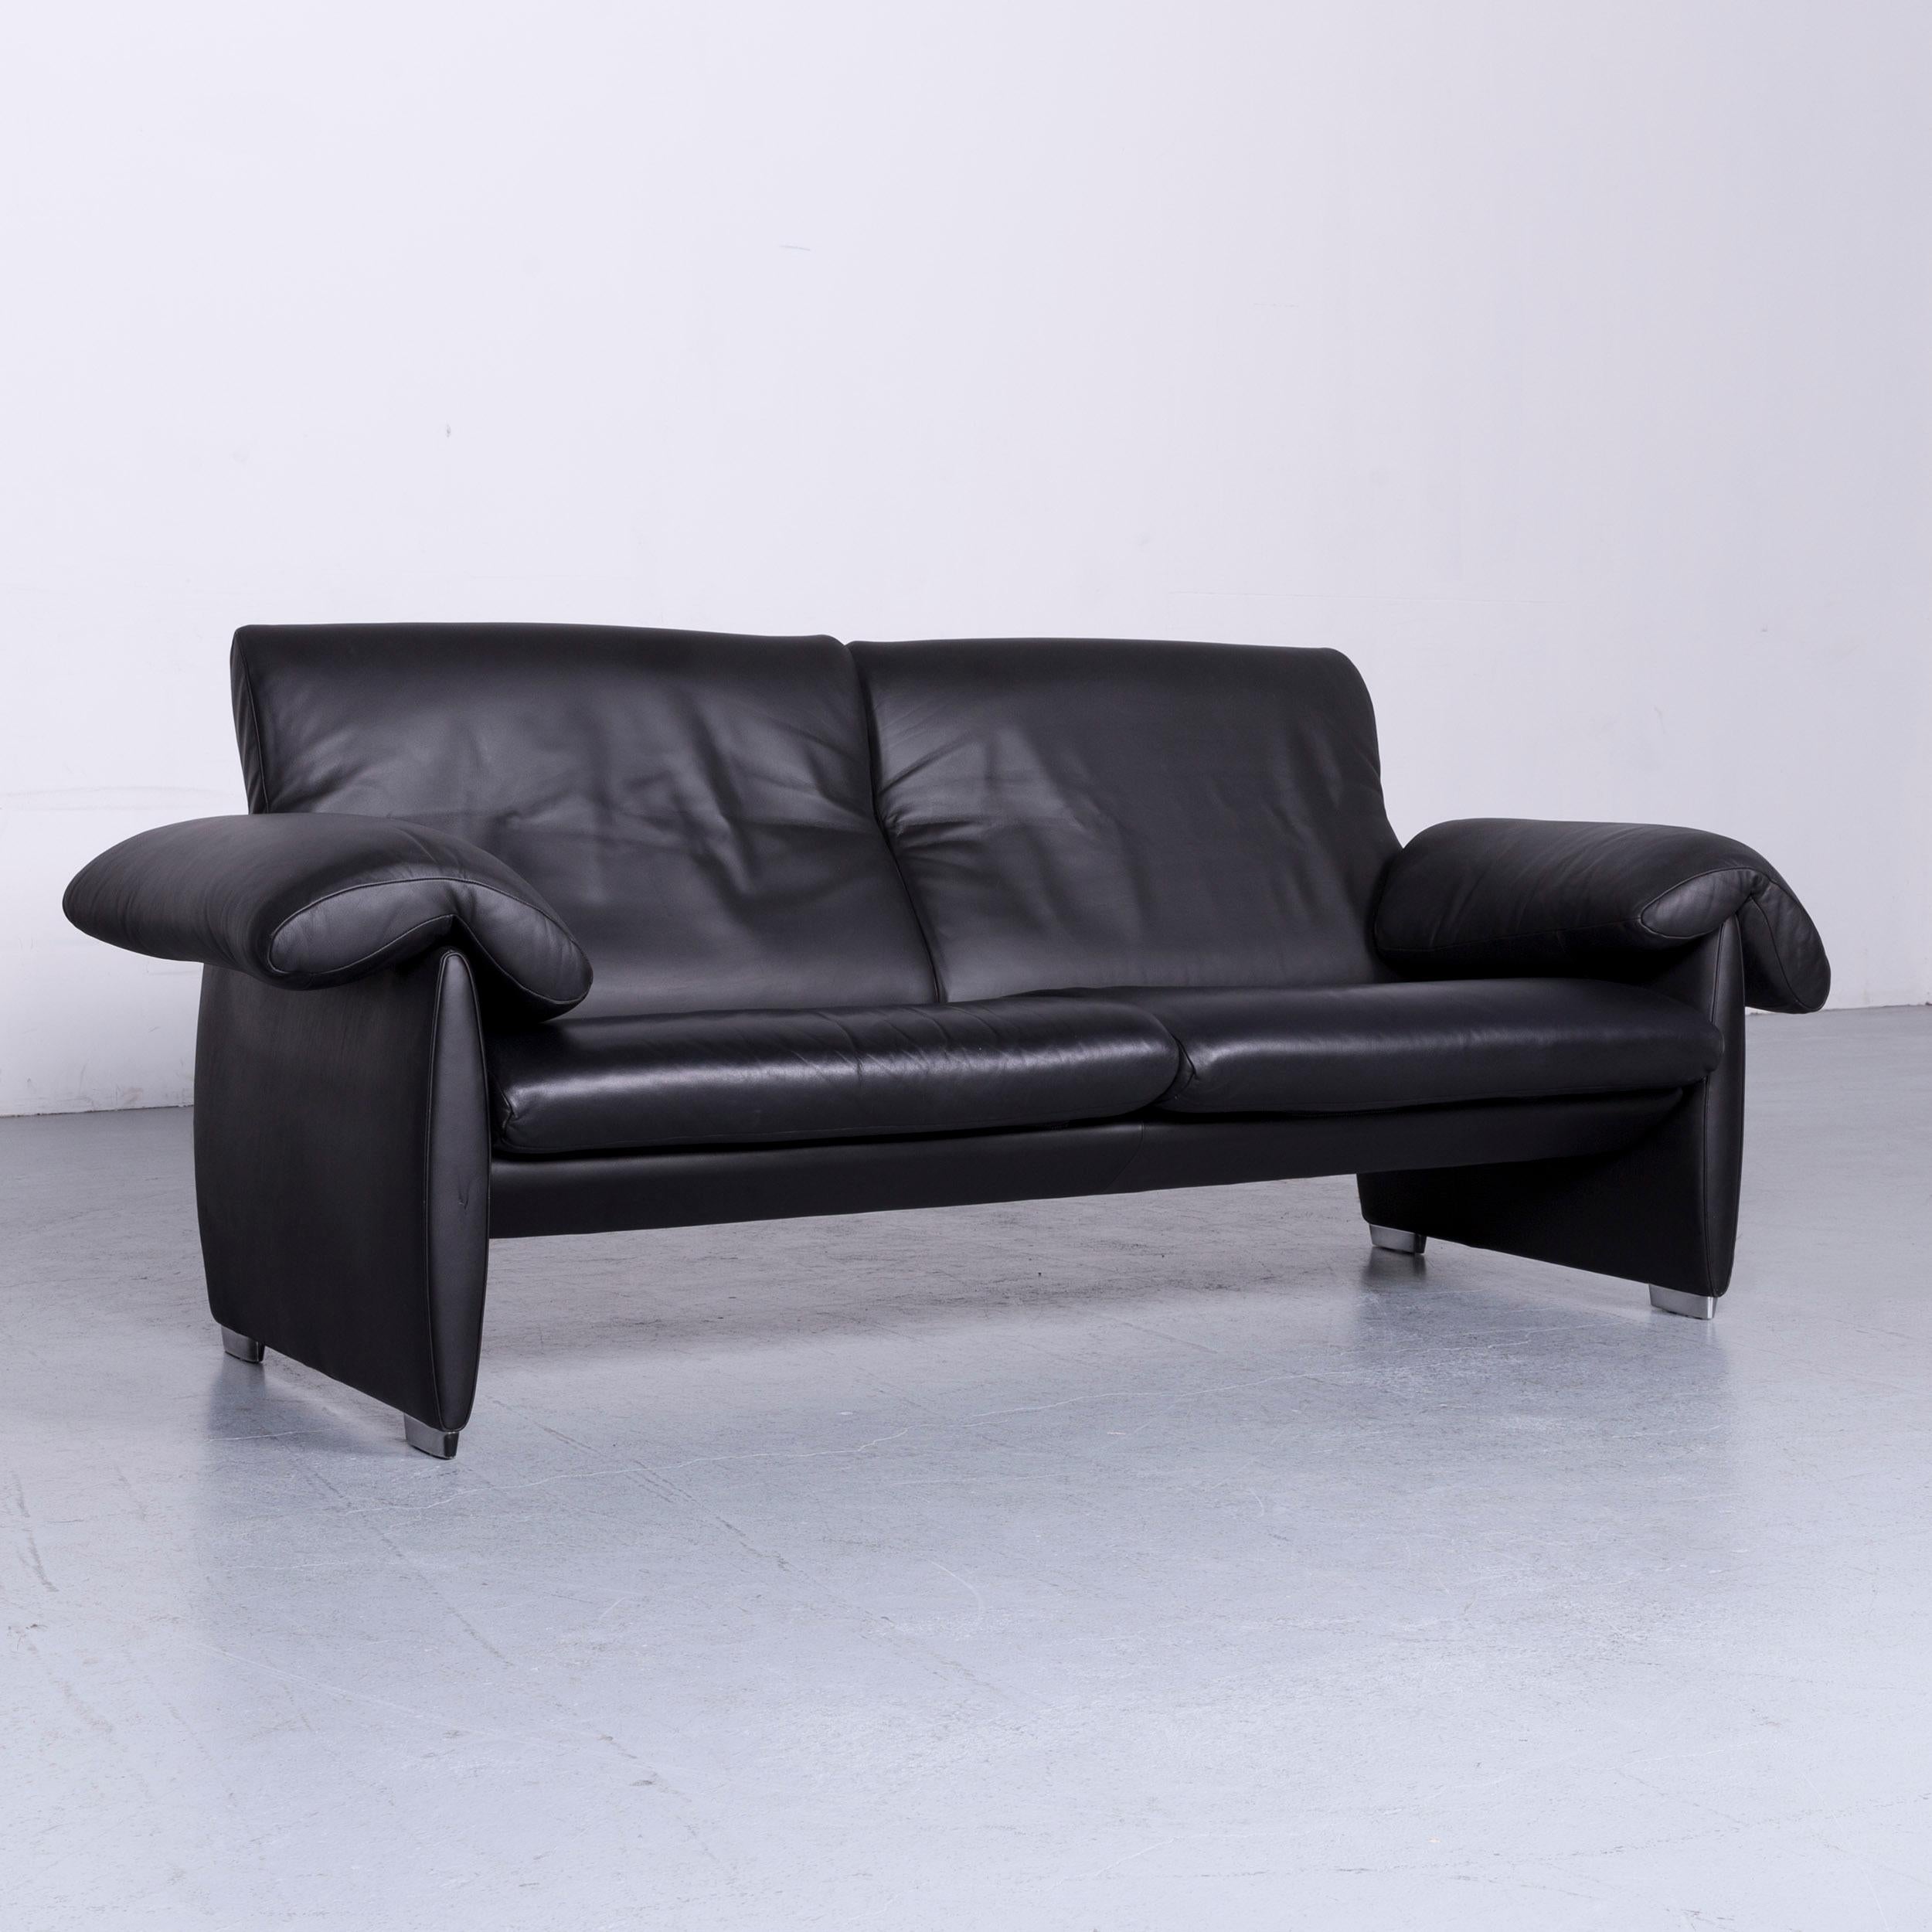 Swiss De Sede DS 10 Designer Sofa Black Leather Three-Seat Two-Seat Set Couch